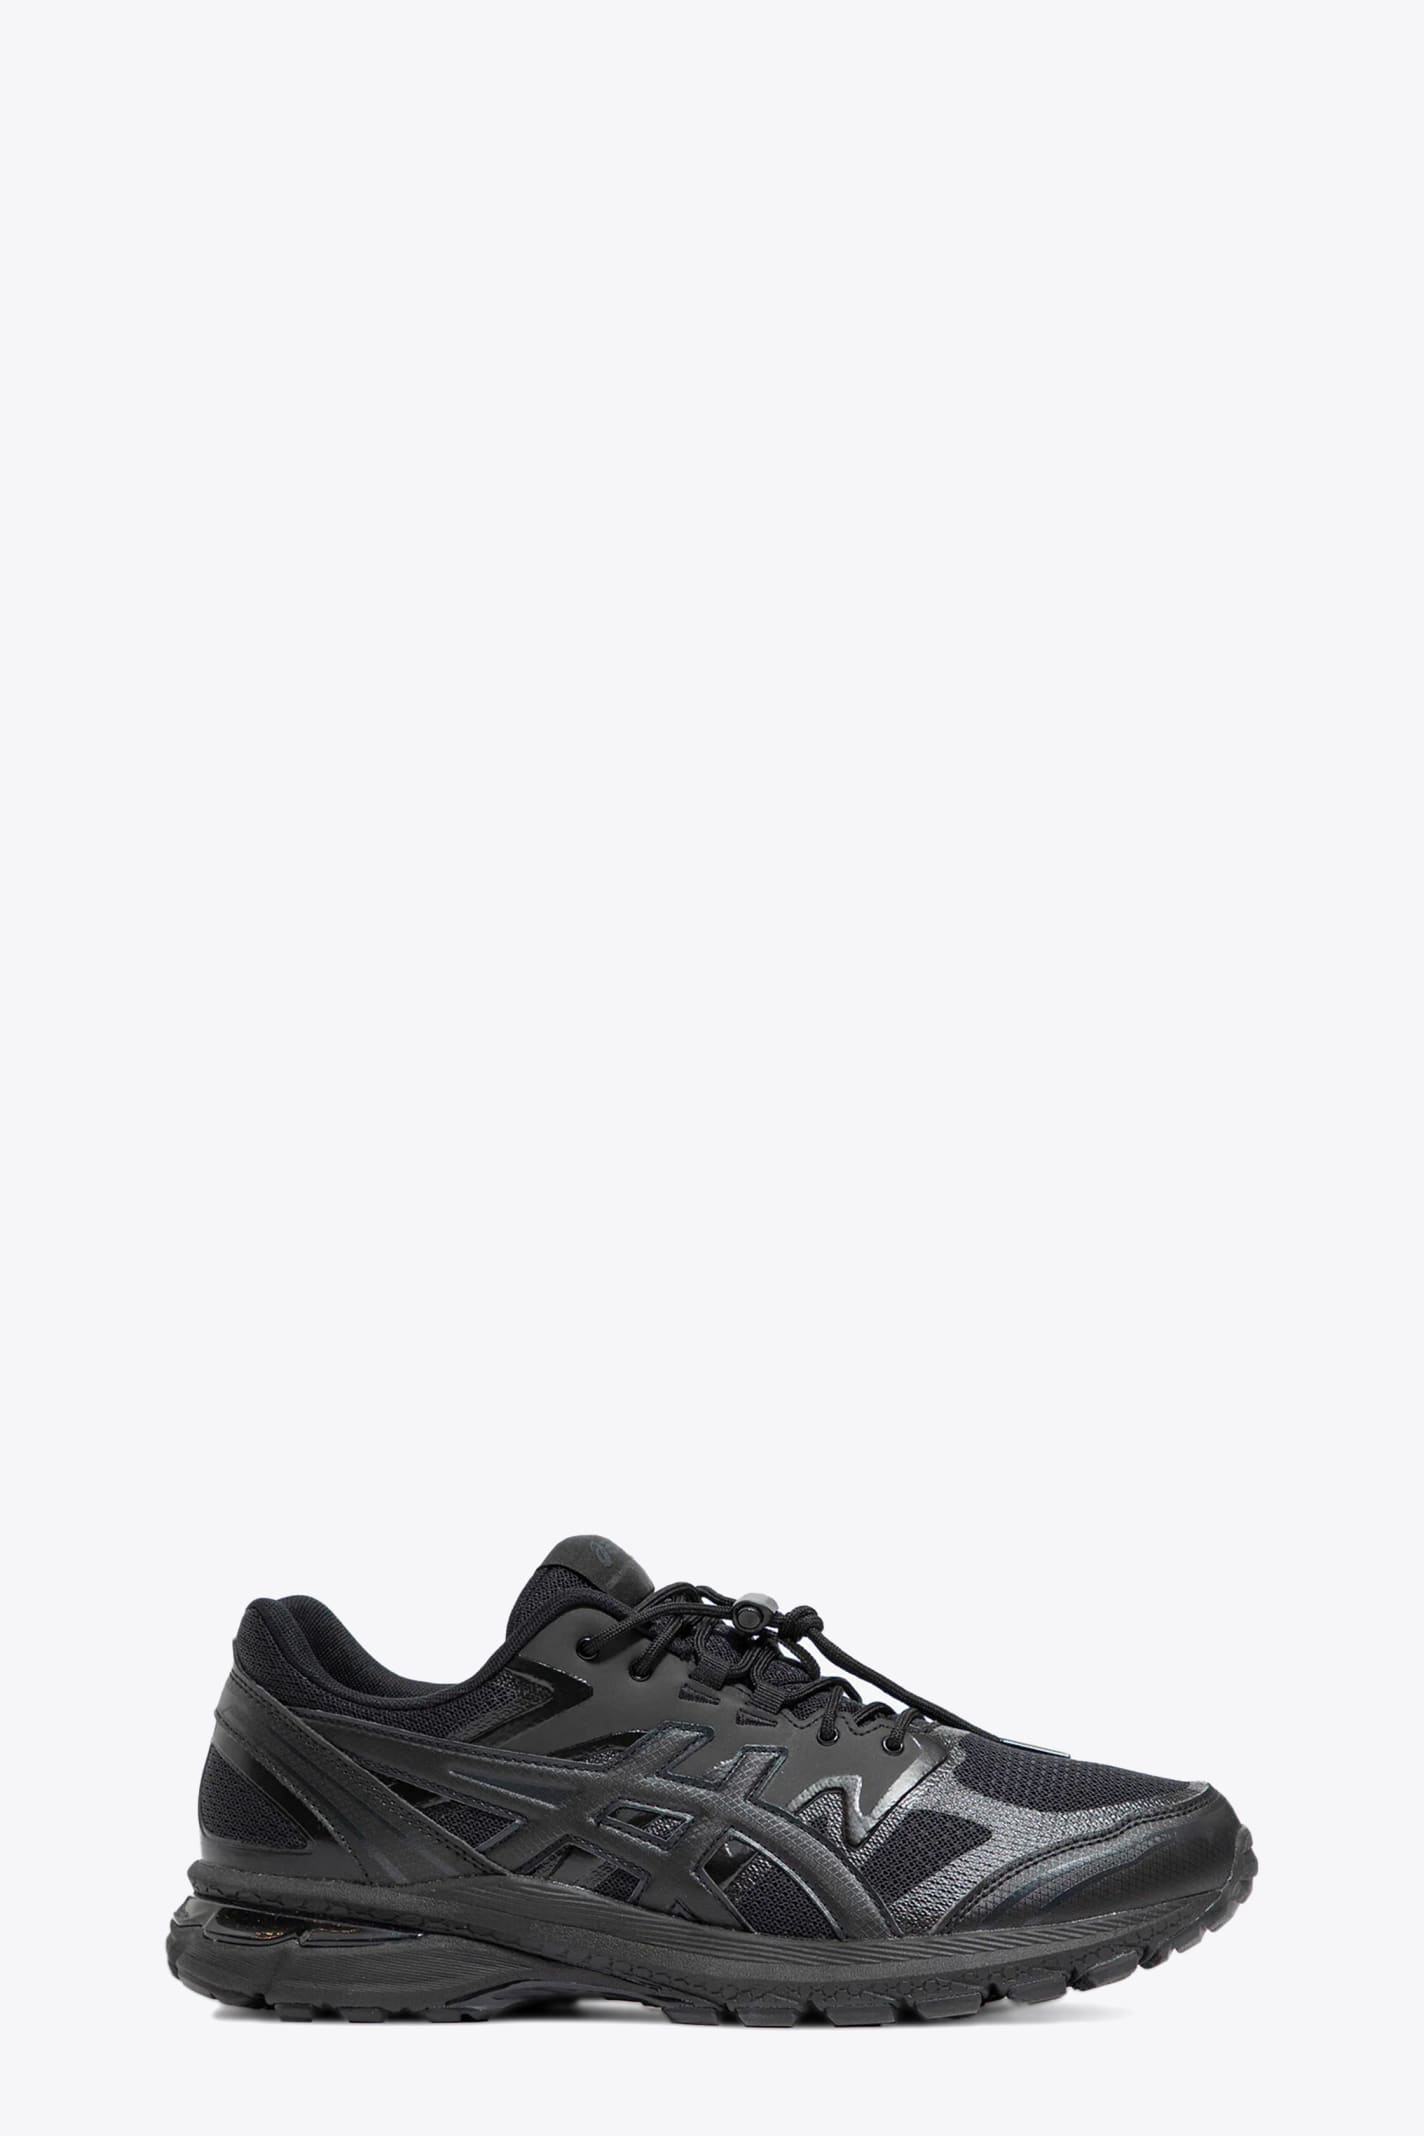 Mens Sneakers X Asics Asics collaboration black mesh and leather running sneaker